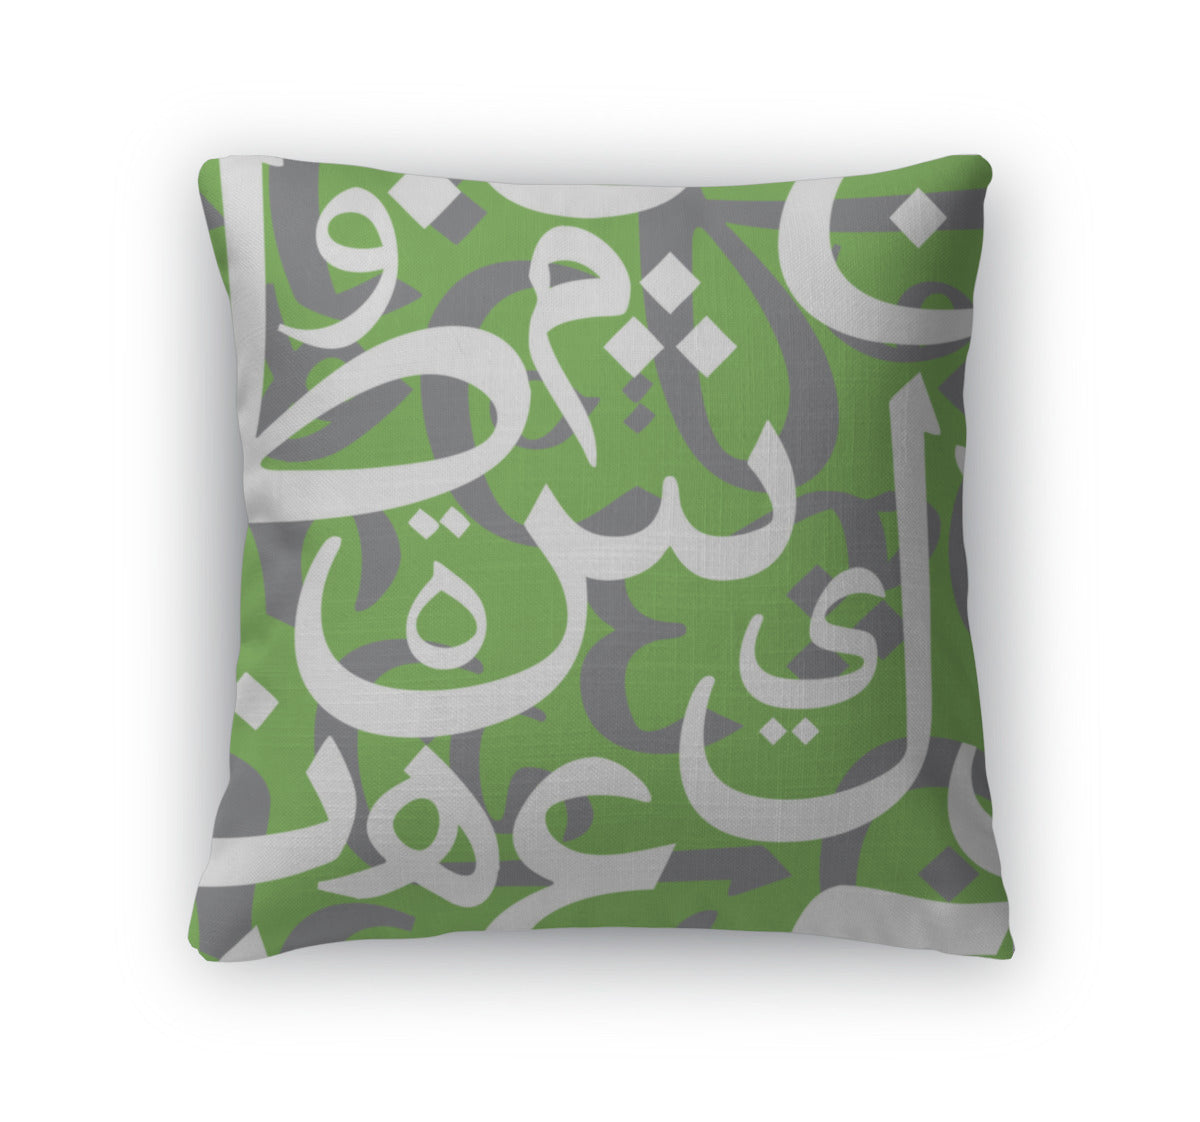 Throw Pillow, Arabic Letters Pattern